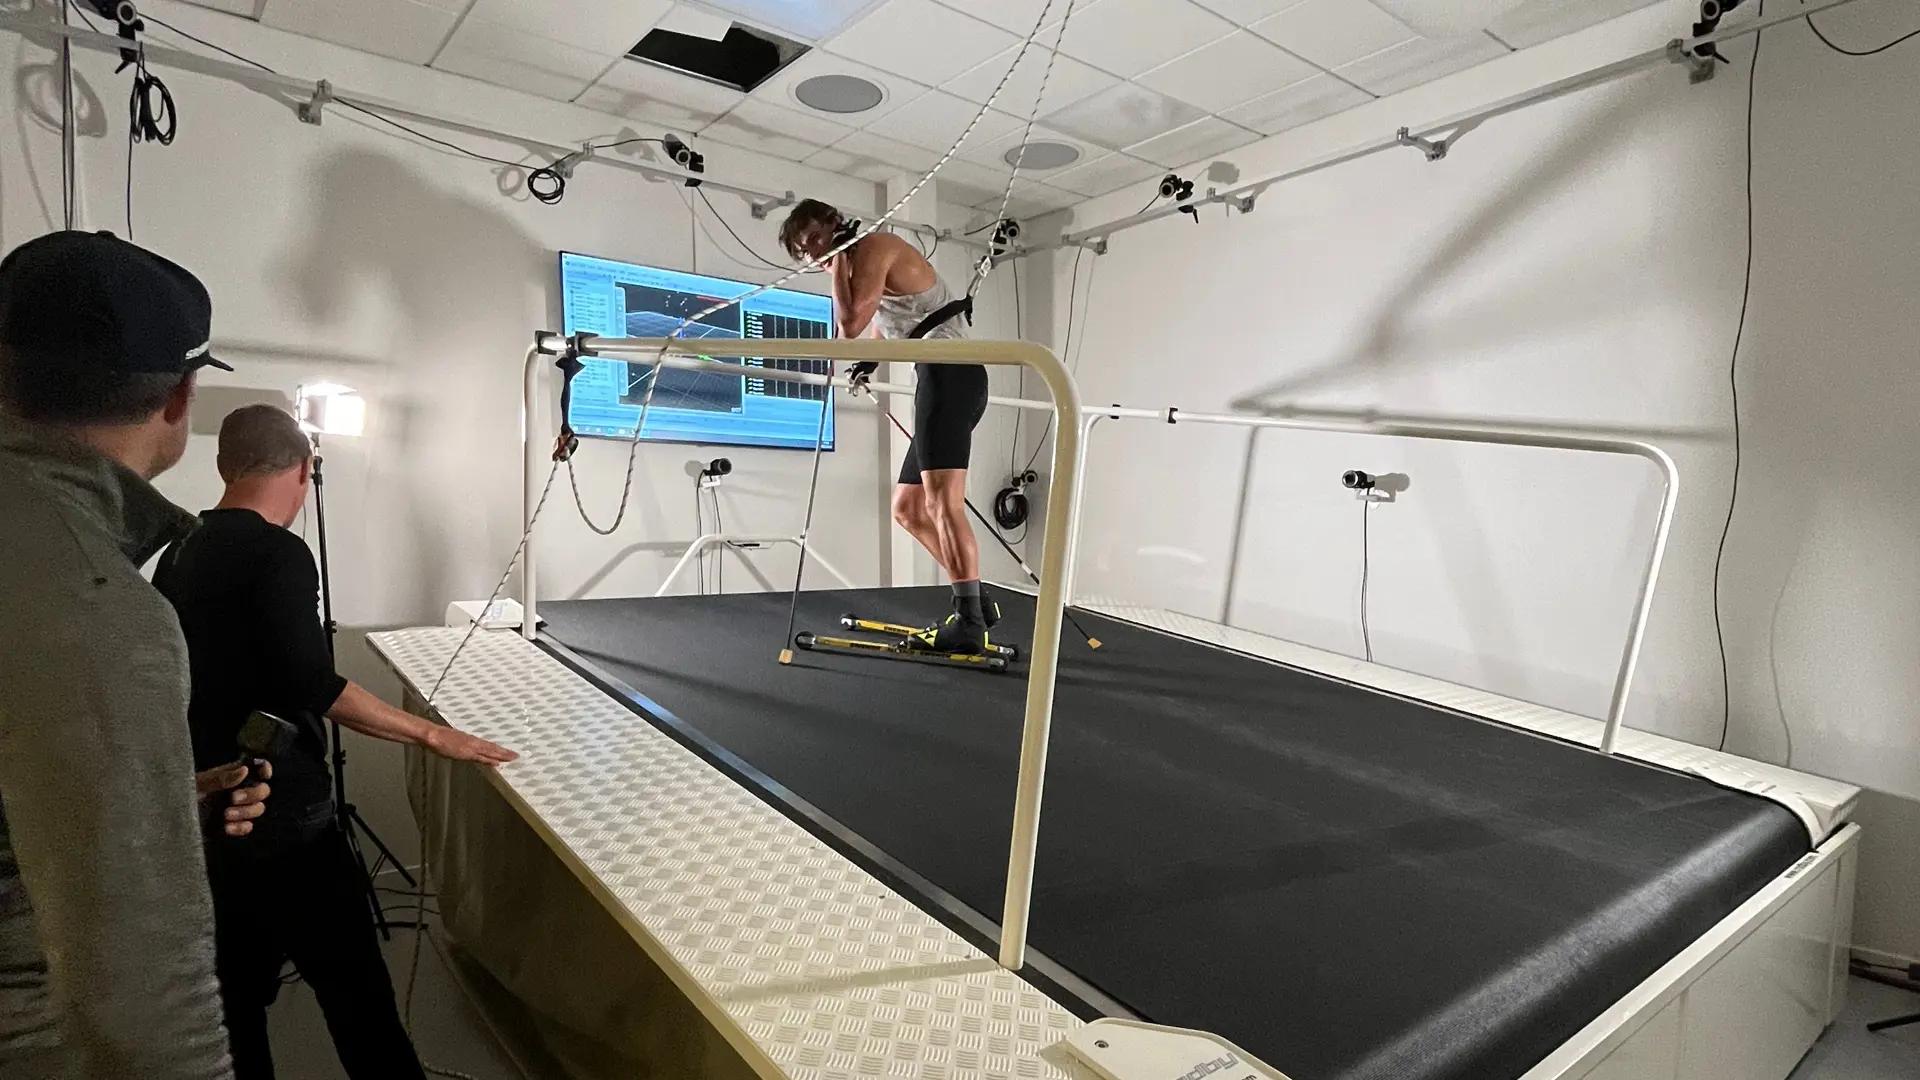 Elite skier Max Novak, arguably the best roller skier in the world, is turning to Chalmers to help him achieve his goals. He uses the technology available in the physiology lab, a unique environment in Chalmers' Fuse makerspace.